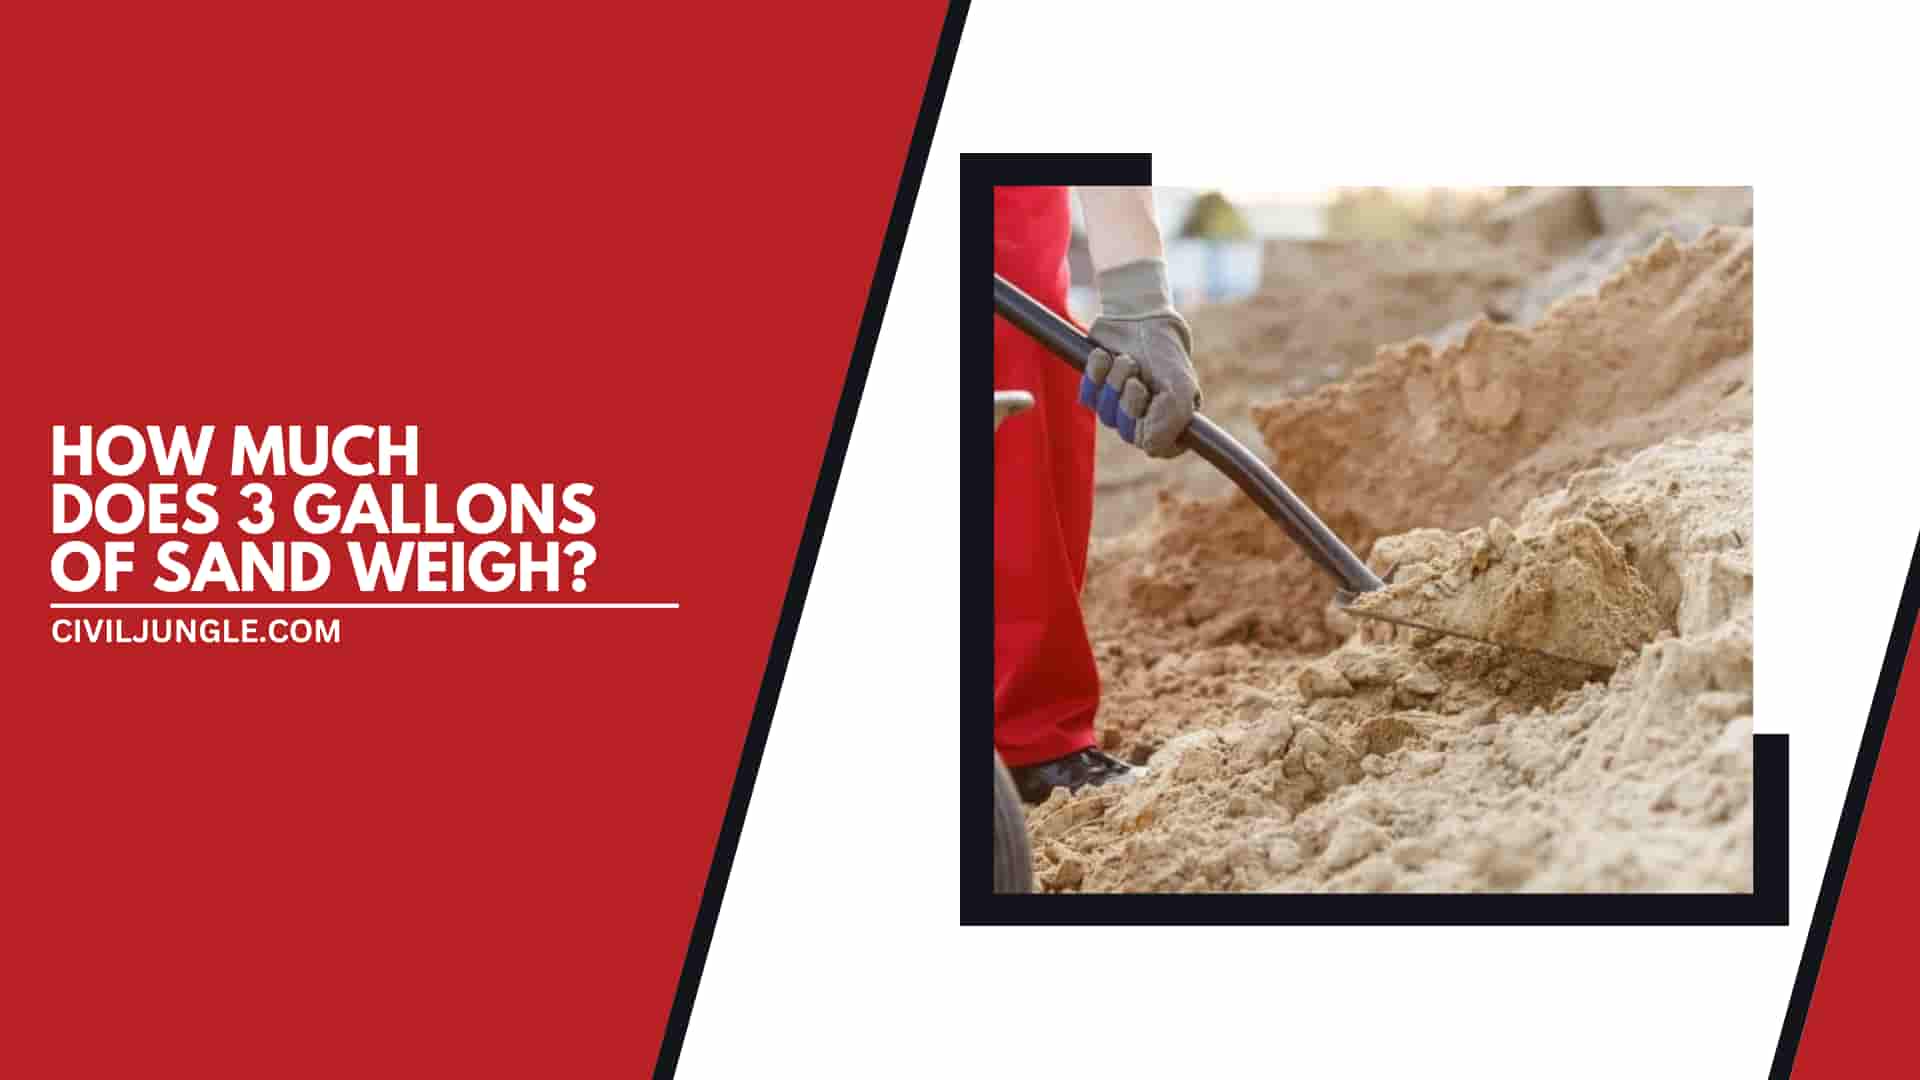 How Much Does 3 Gallons of Sand Weigh?